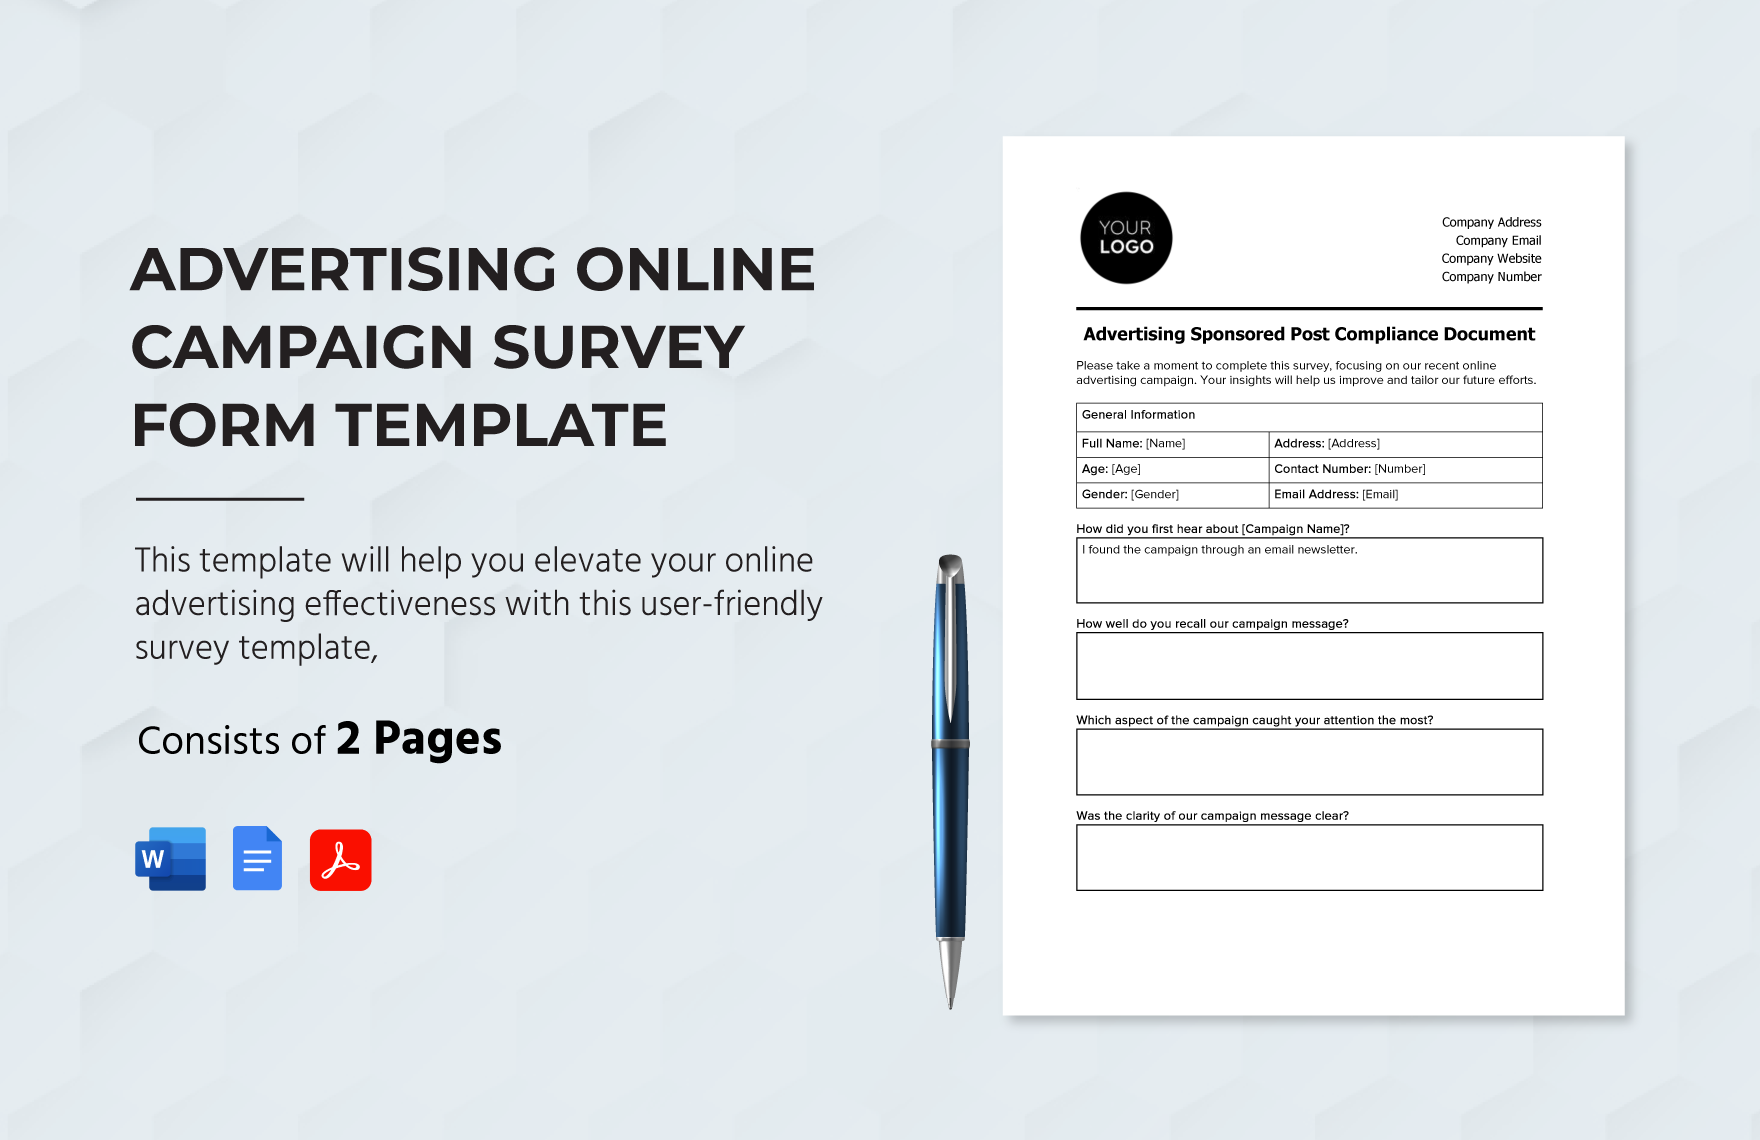 Advertising Online Campaign Survey Form Template in Word, Google Docs, PDF